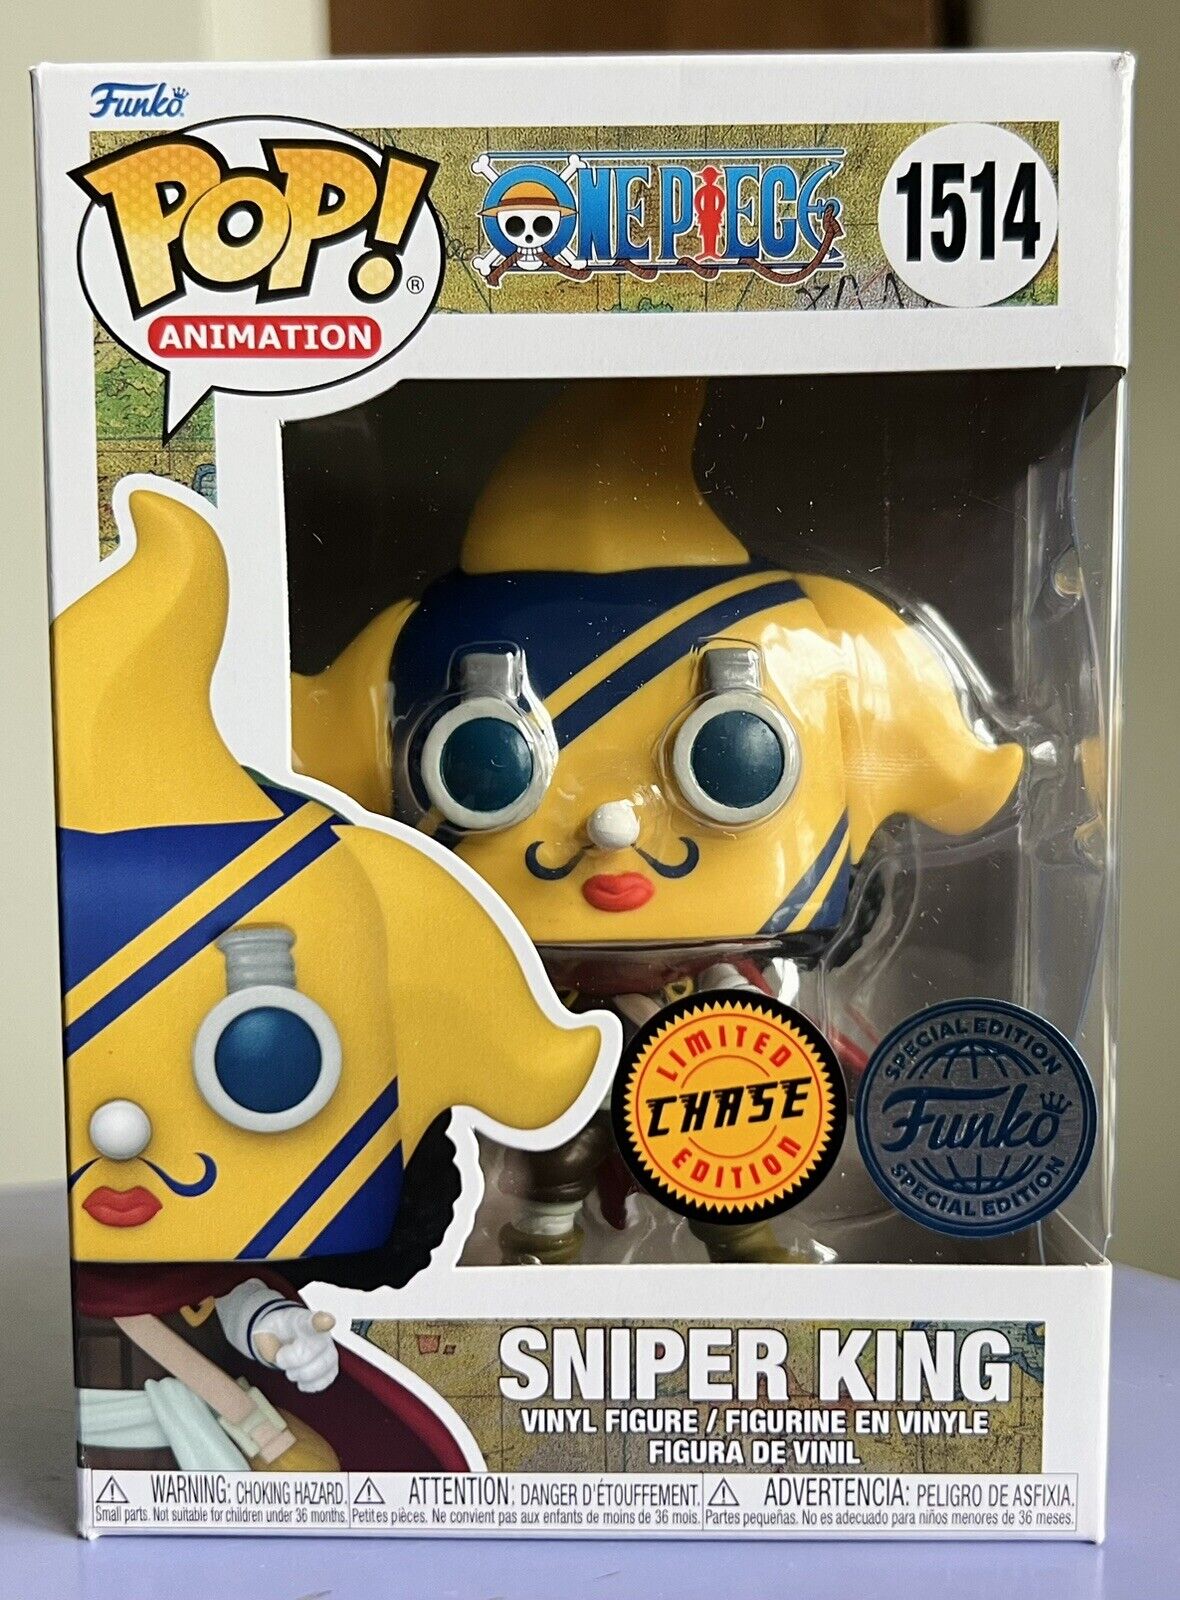 CHASE Funko Pop Animation: SNIPER KING #1514 (One Piece) w/ Protectorbb